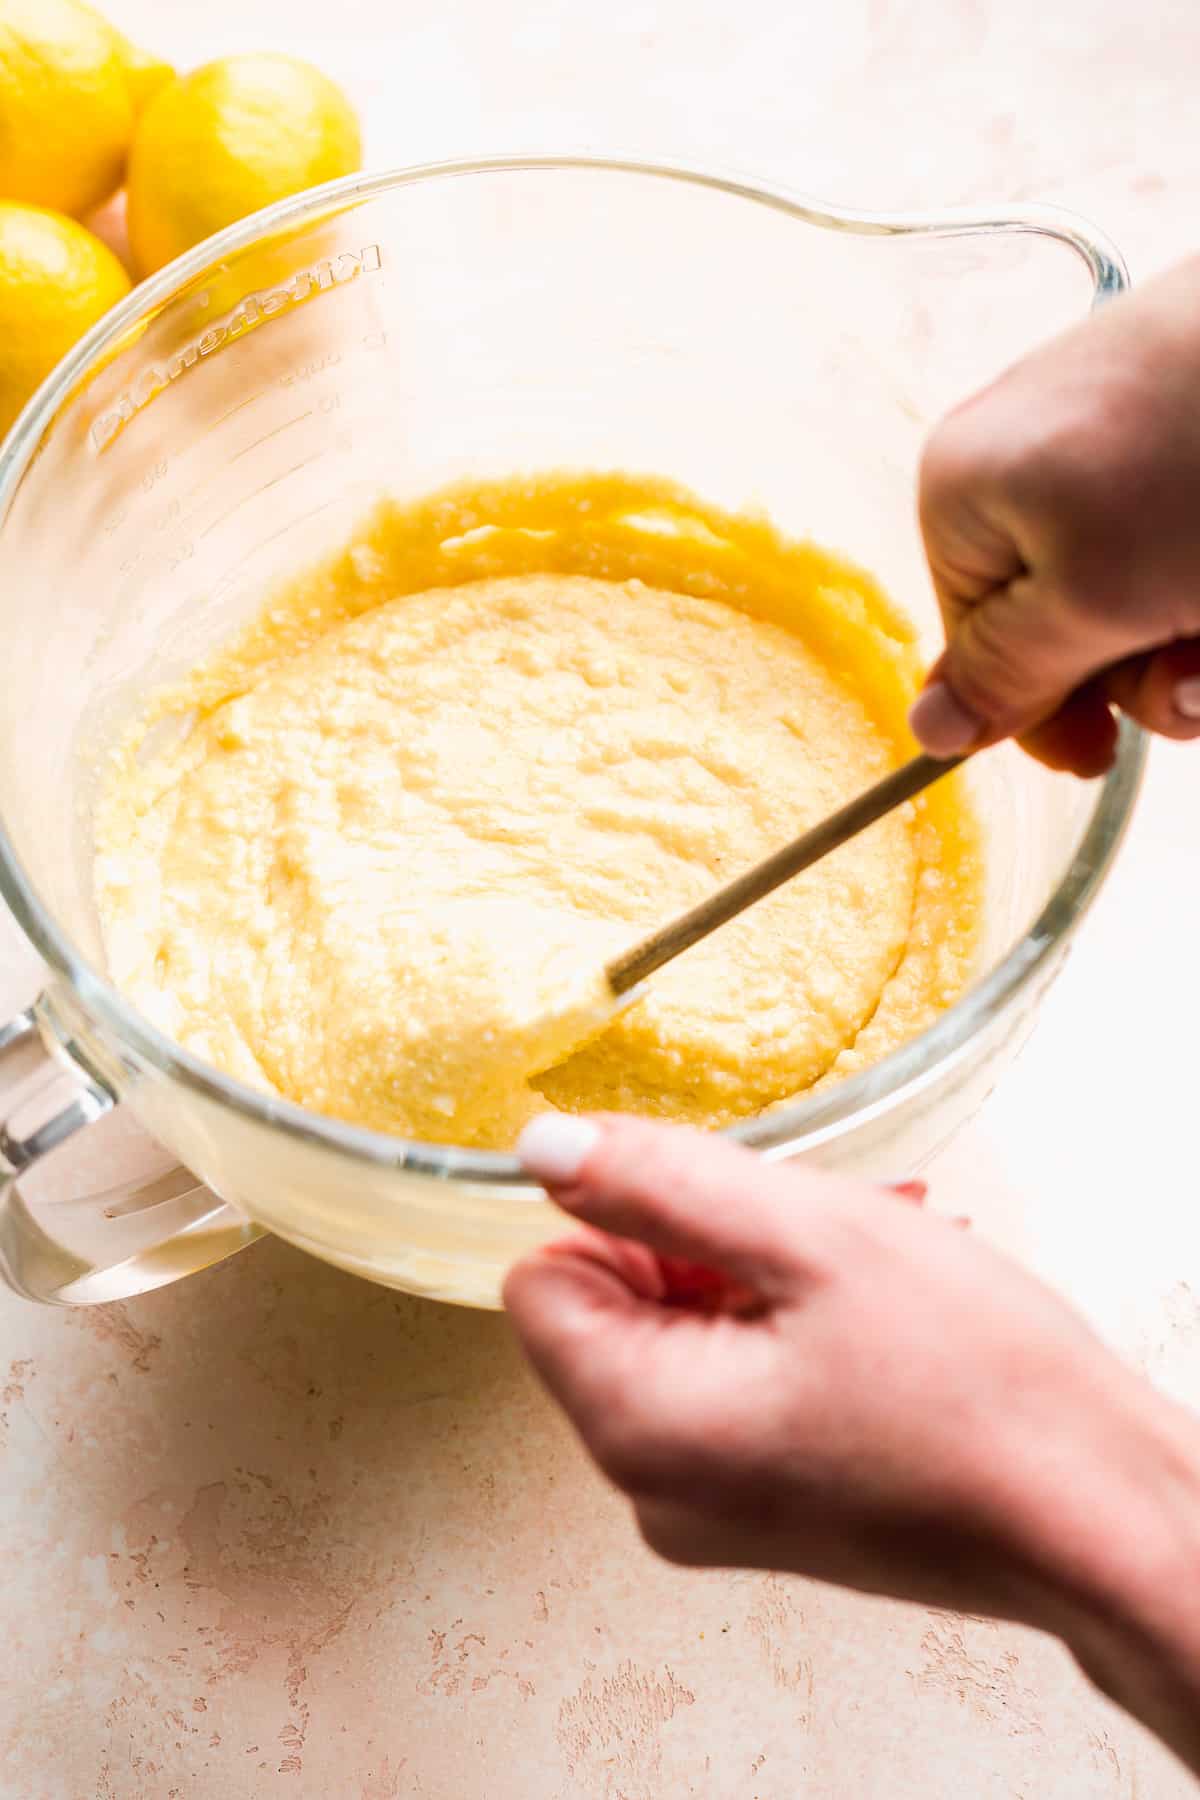 Person mixing lemon cake batter in a bowl.